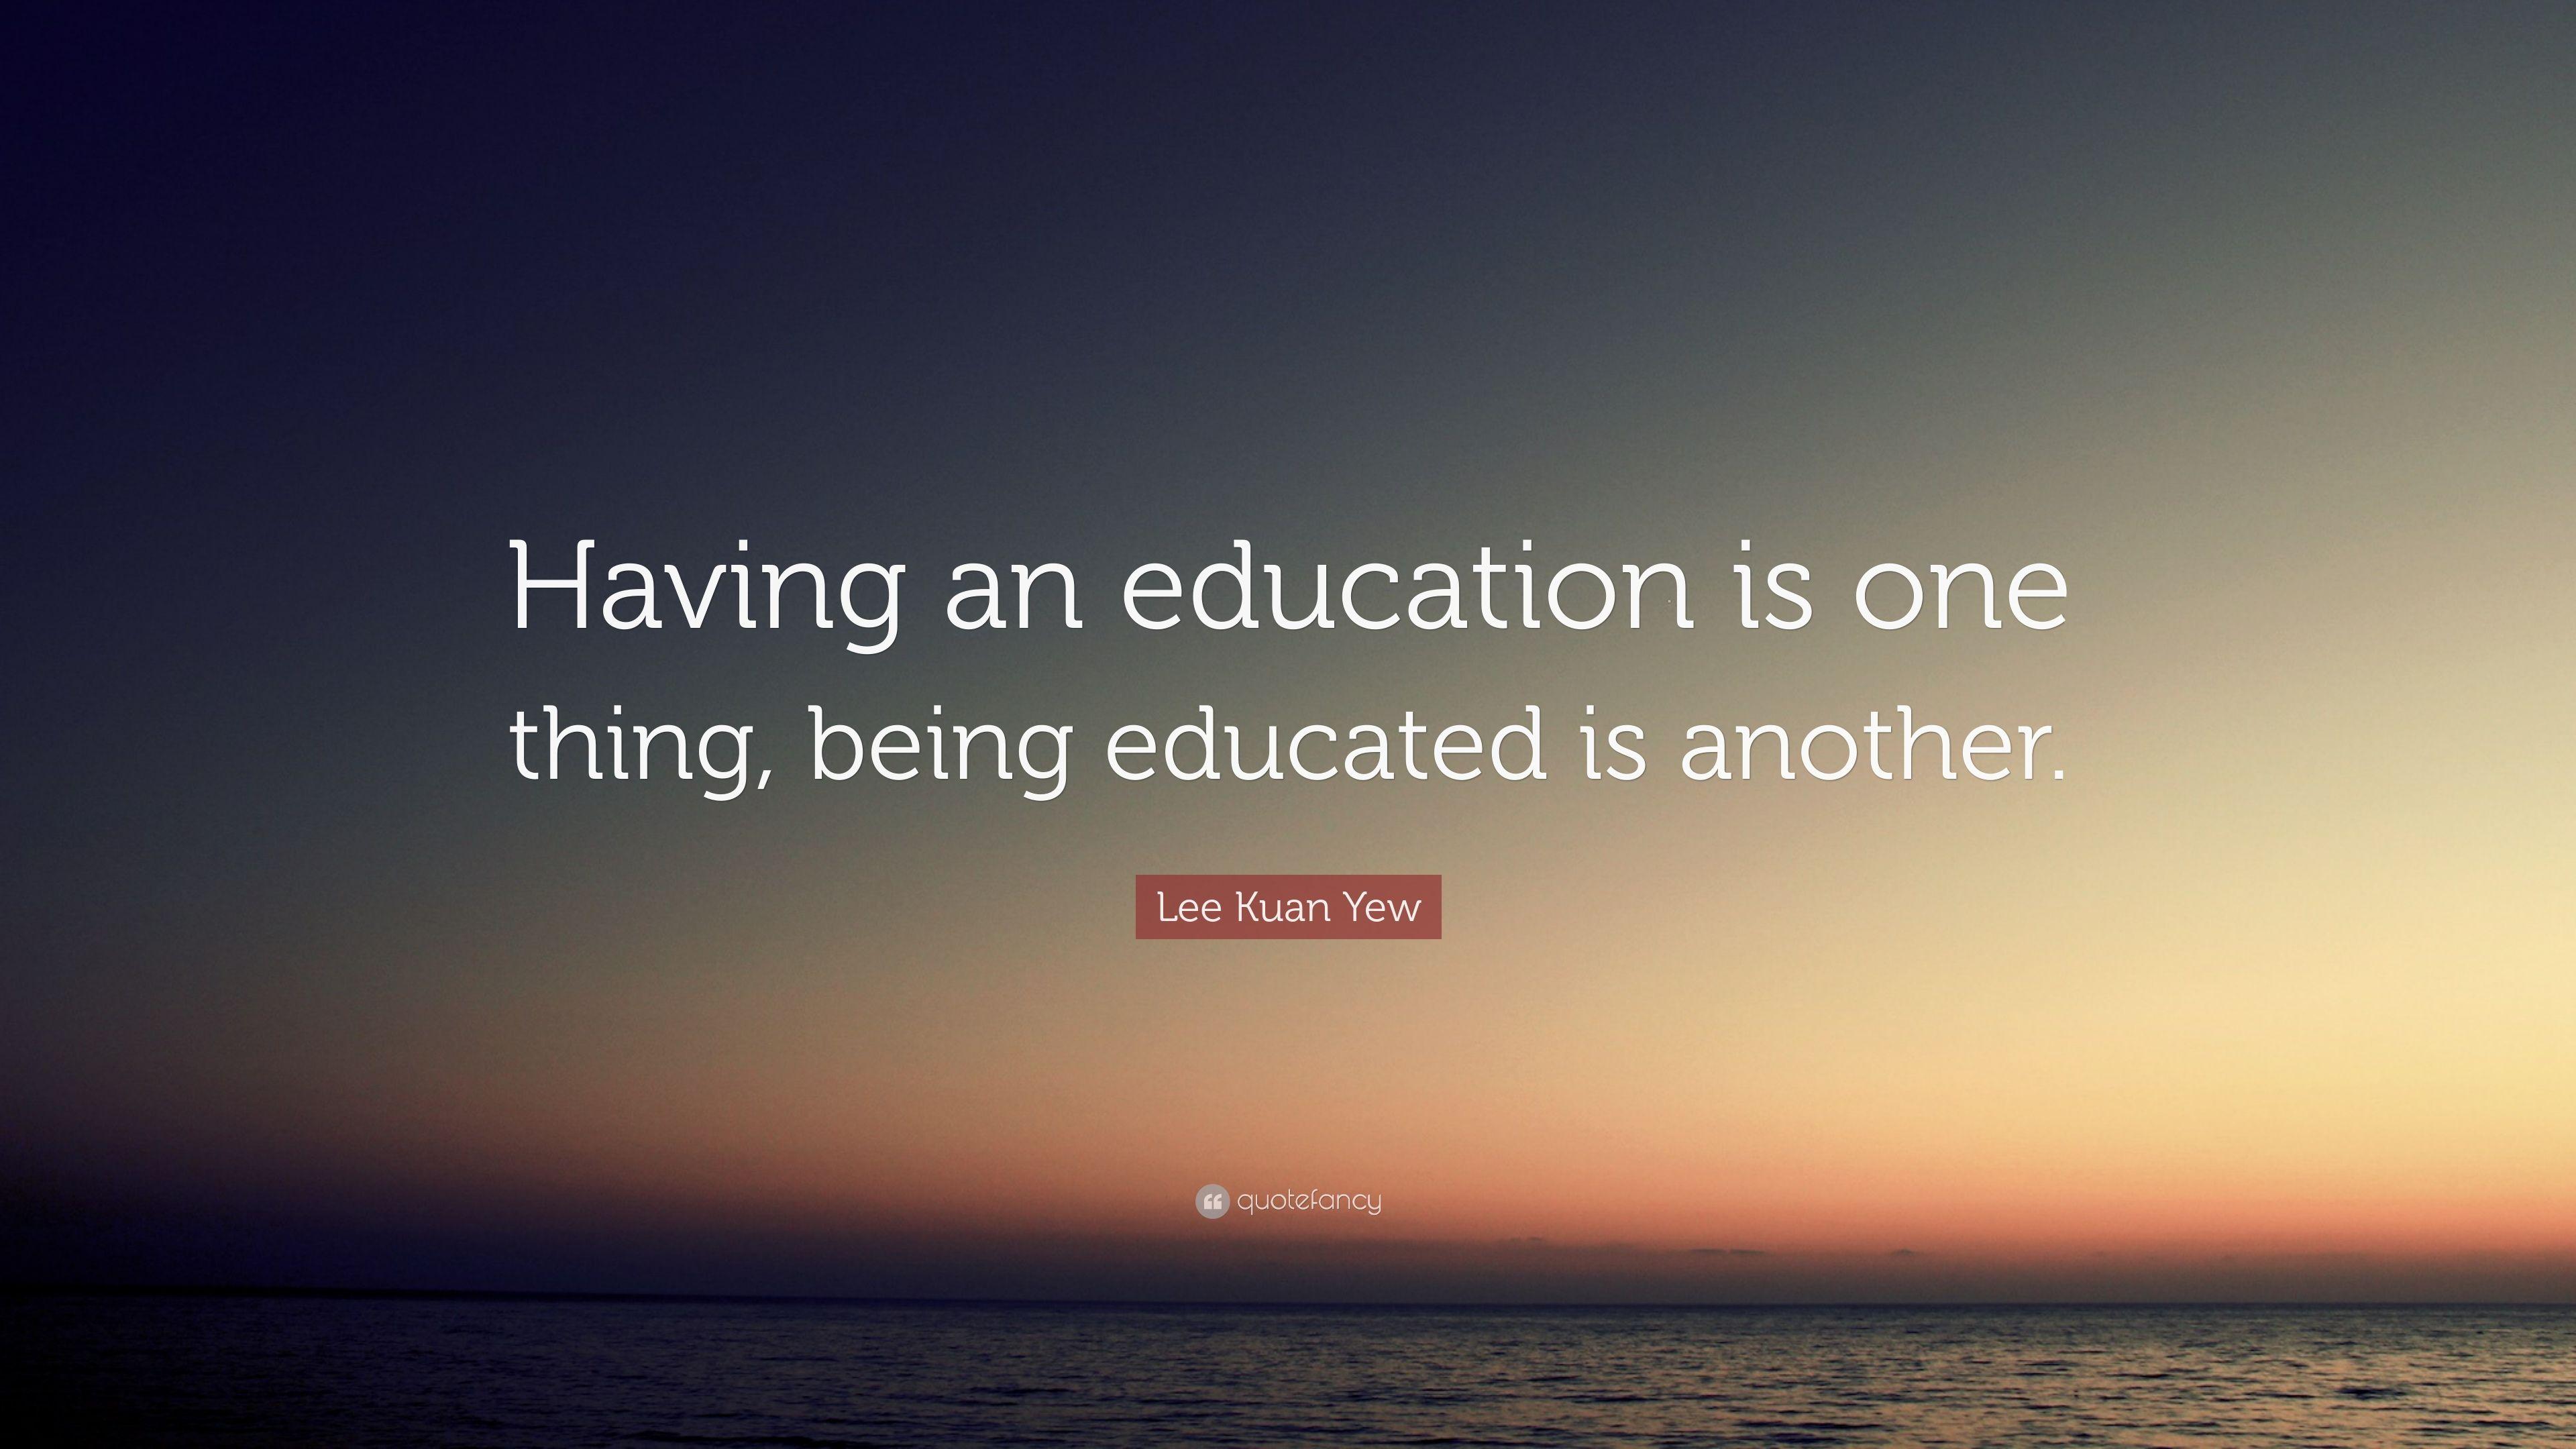 wallpaper hd quotes education